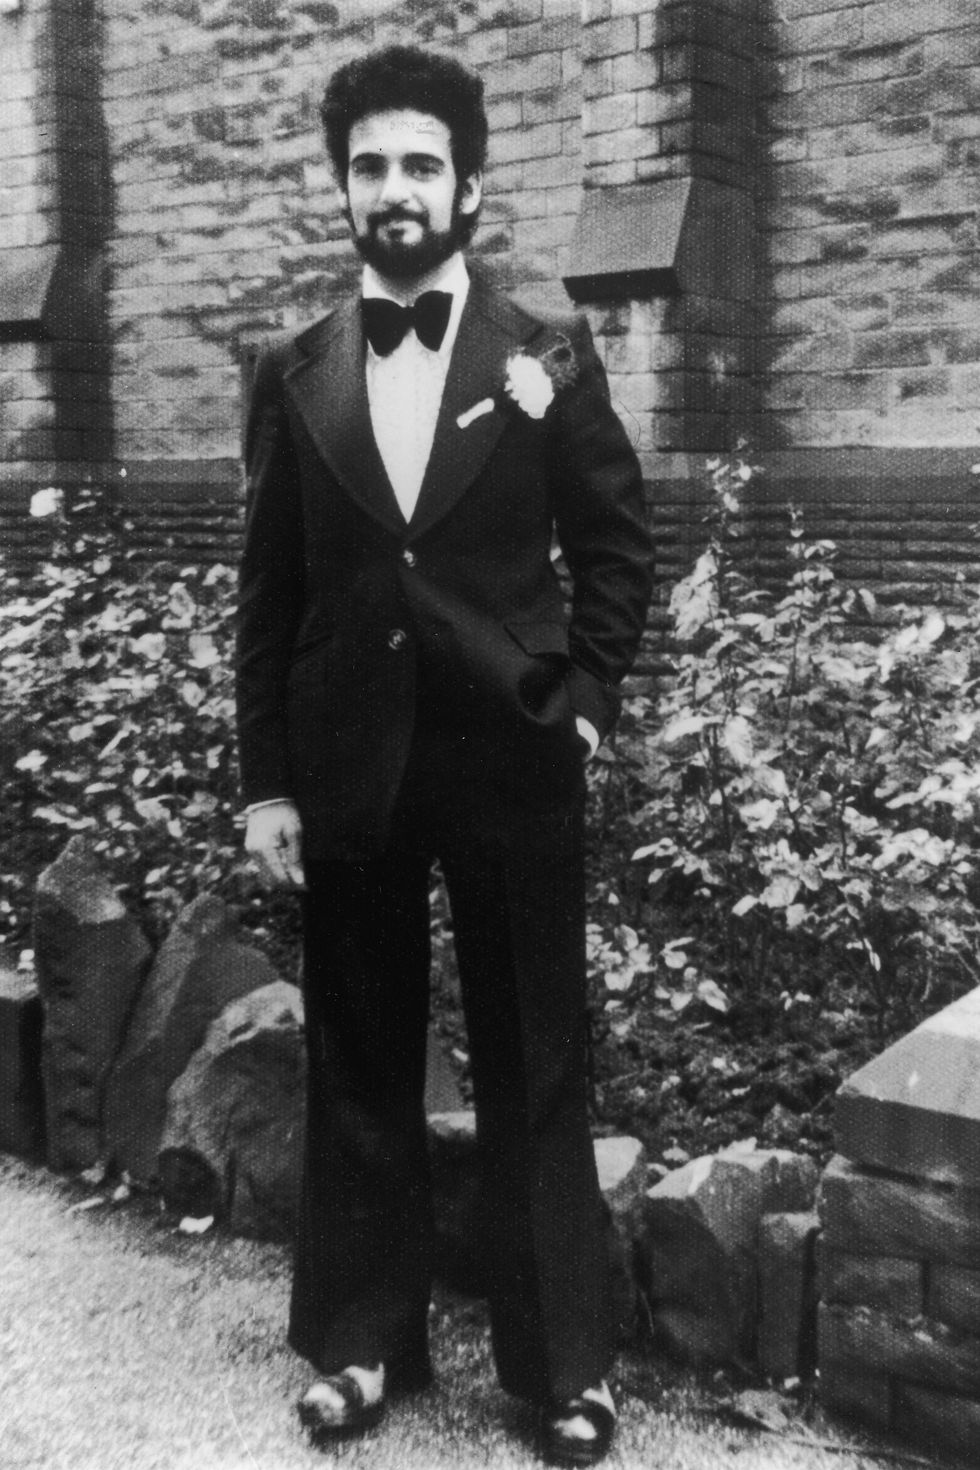 peter sutcliffe wearing a tuxedo and standing for a photo outside a stone building